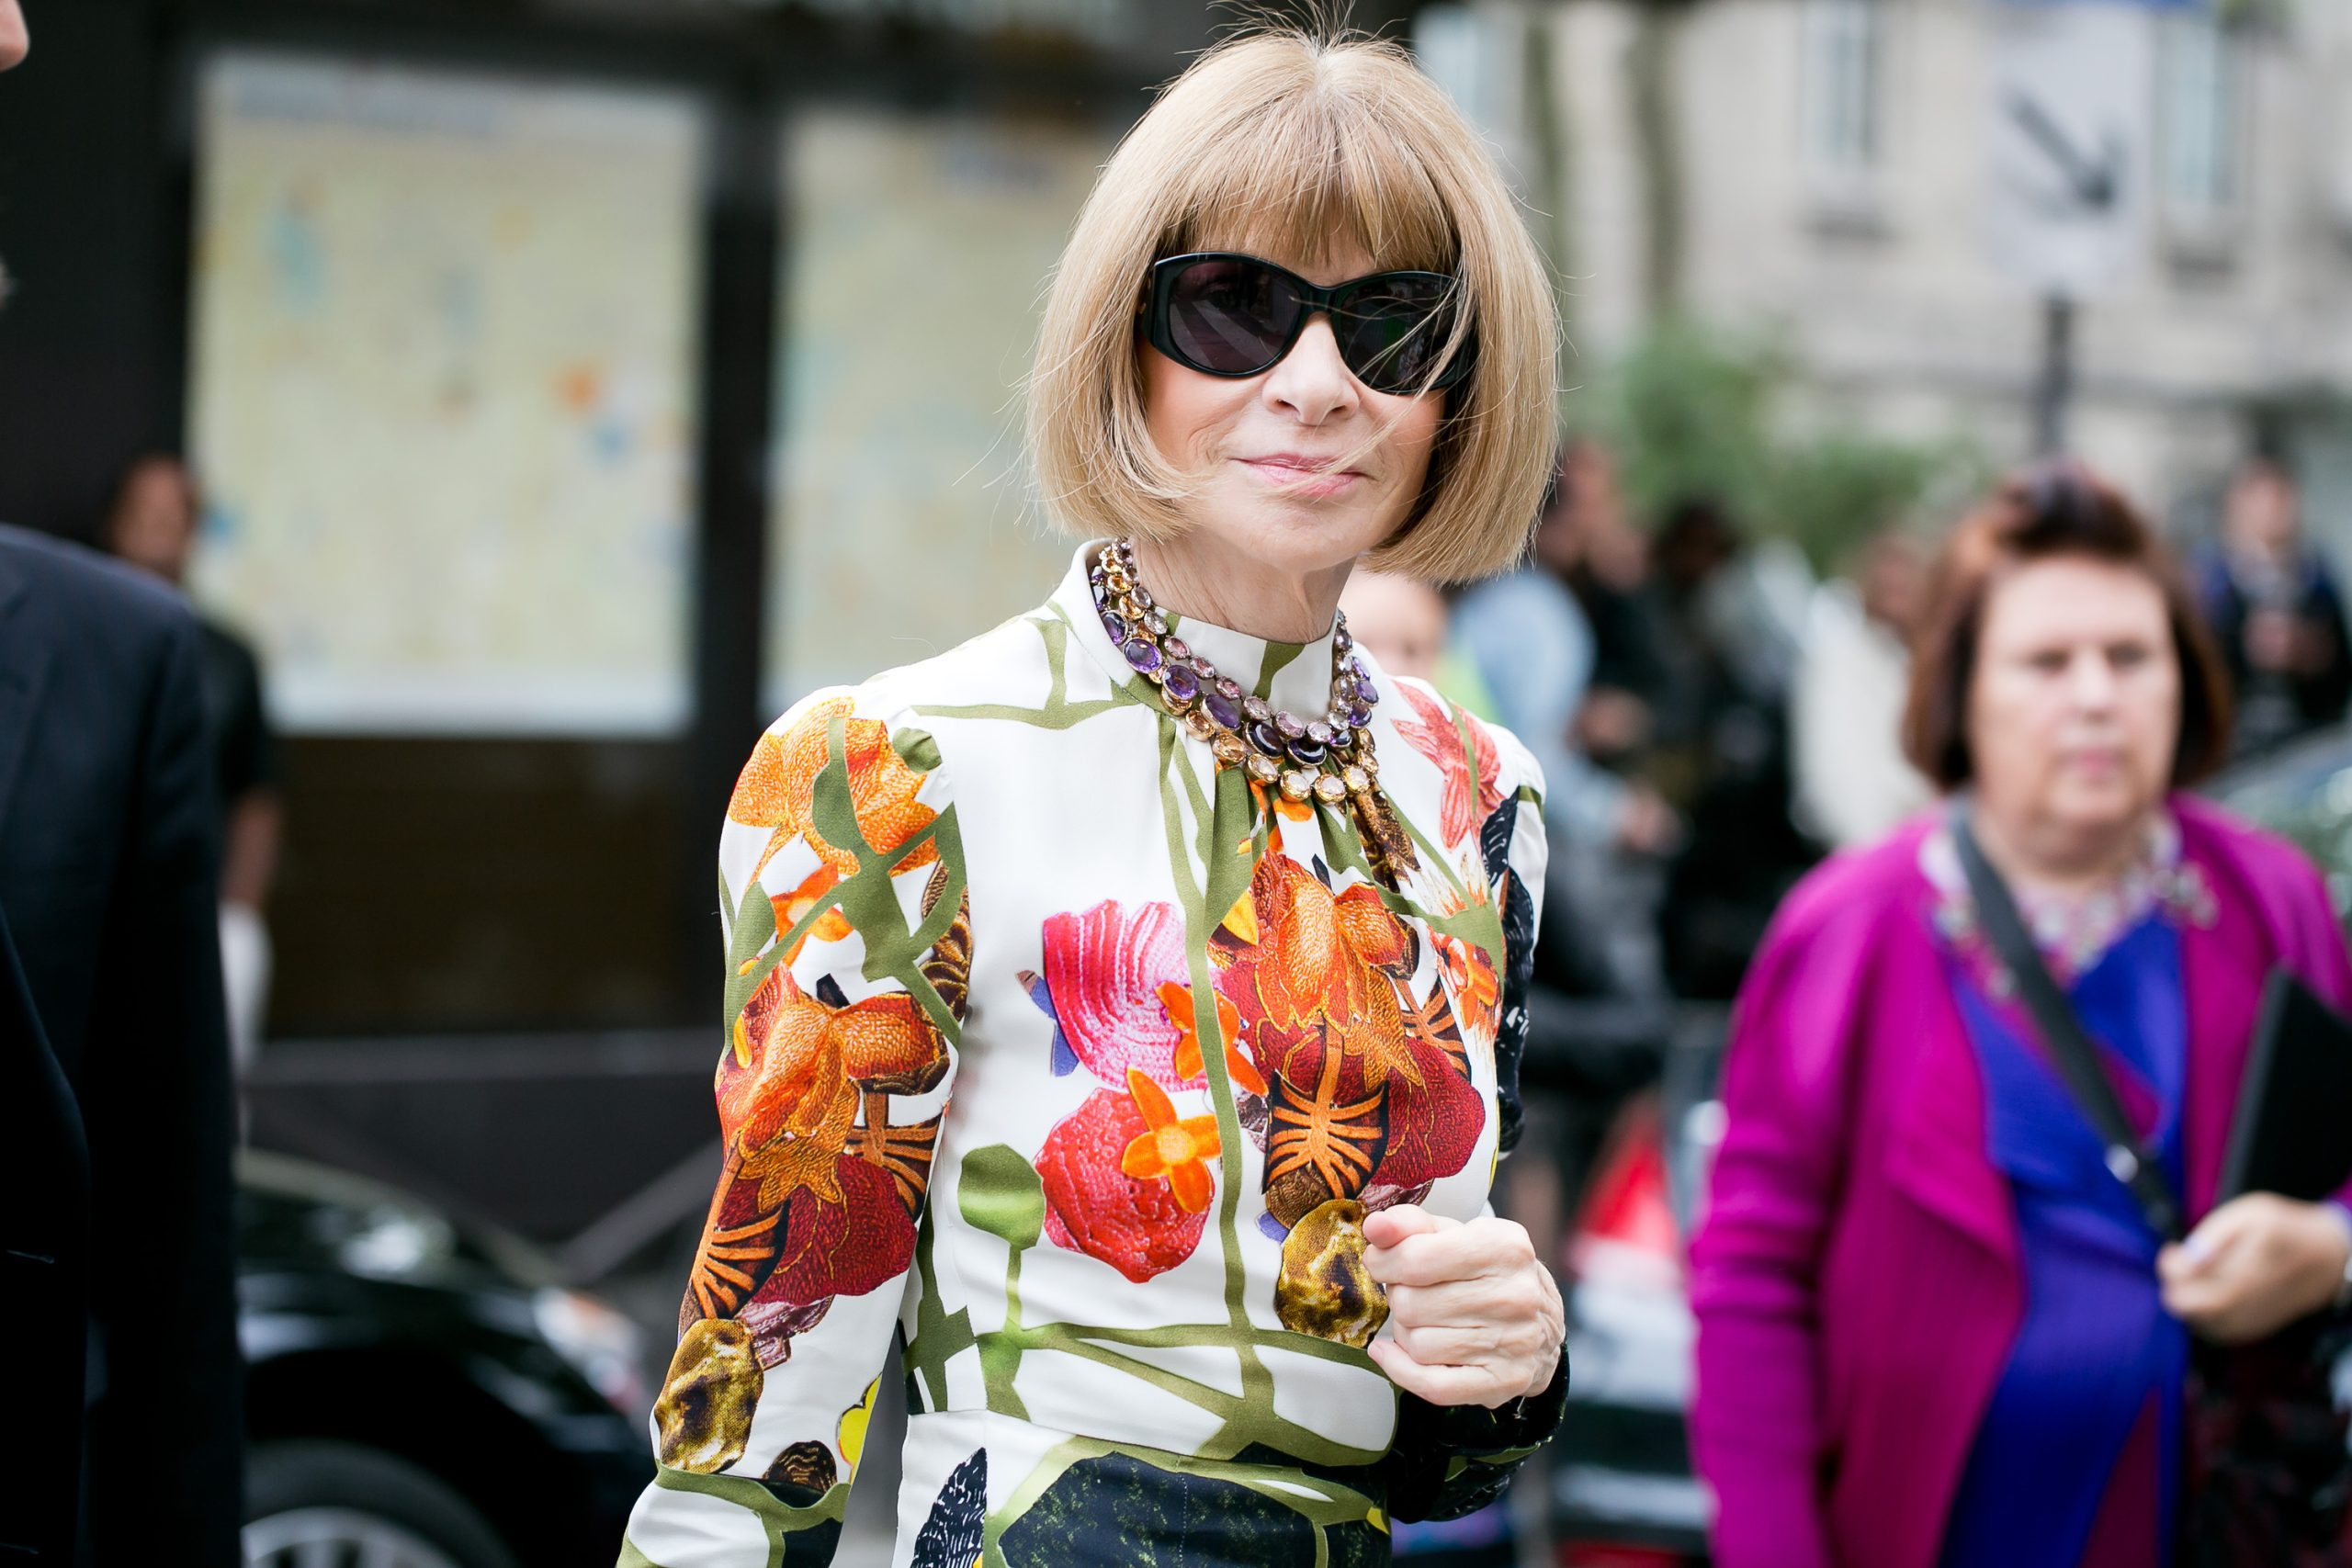 anna-wintour-is-planning-london’s-answer-to-the-met-gala